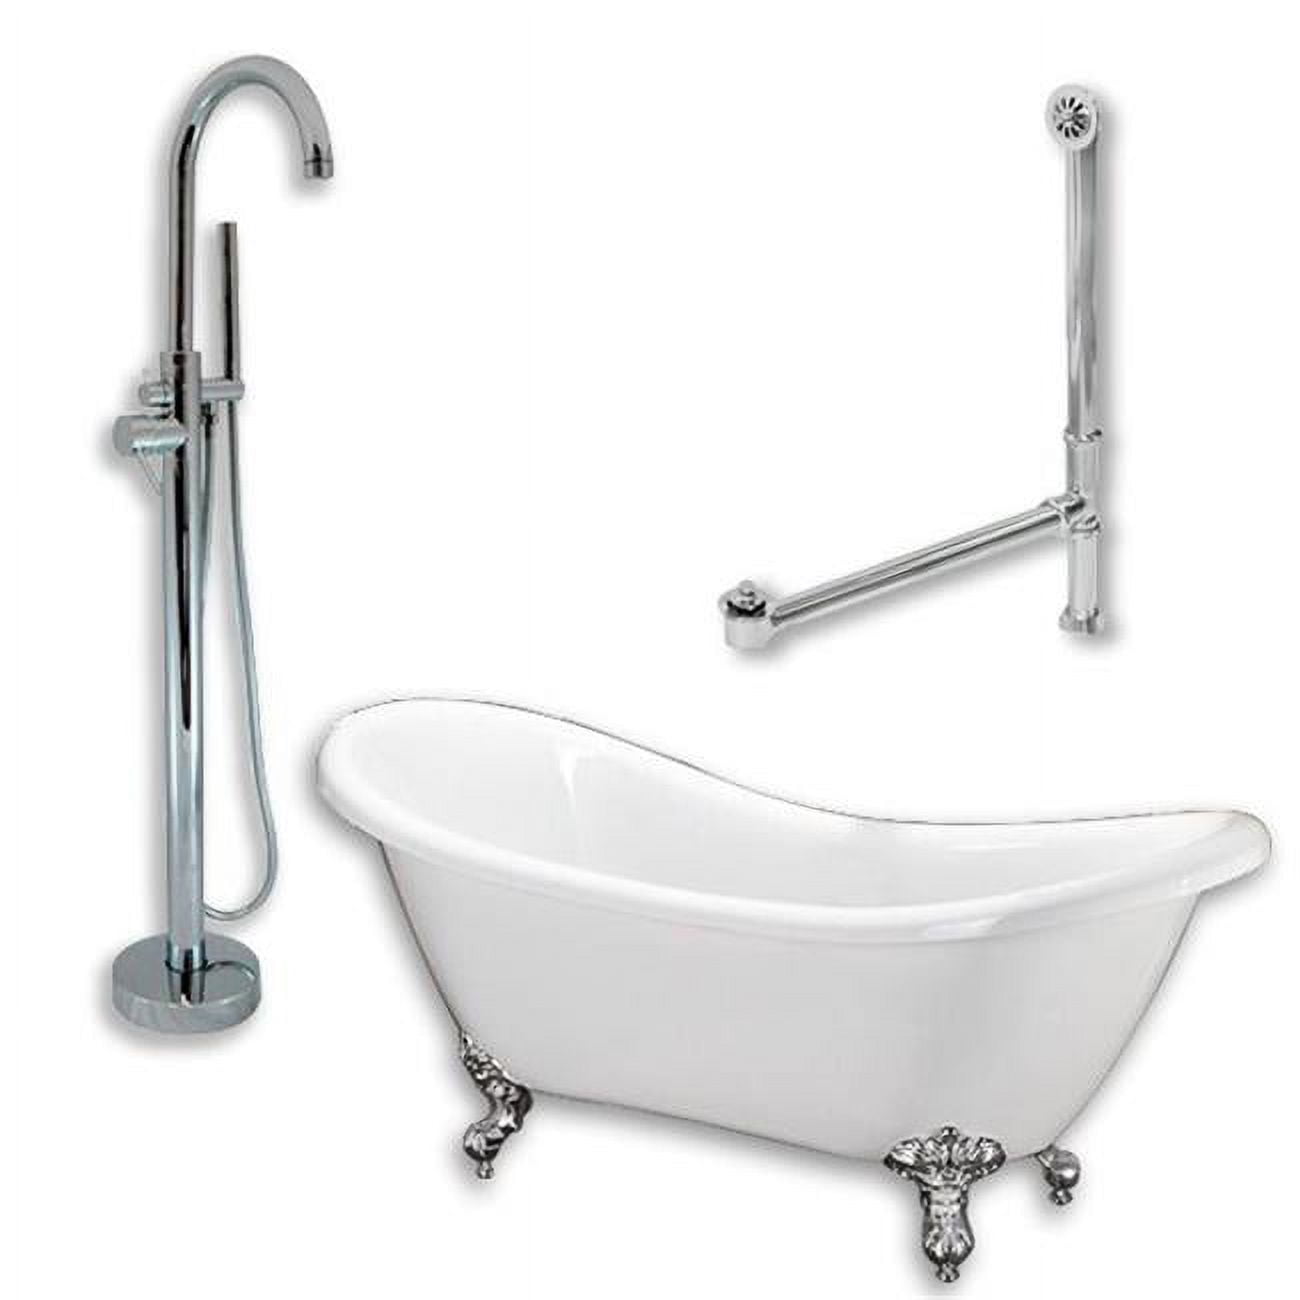 Acrylic Double Ended Slipper Tub With 2 In. Pedestal Holes Deck Risers, Classic Telephone Style Faucet & Chrome Plumbing